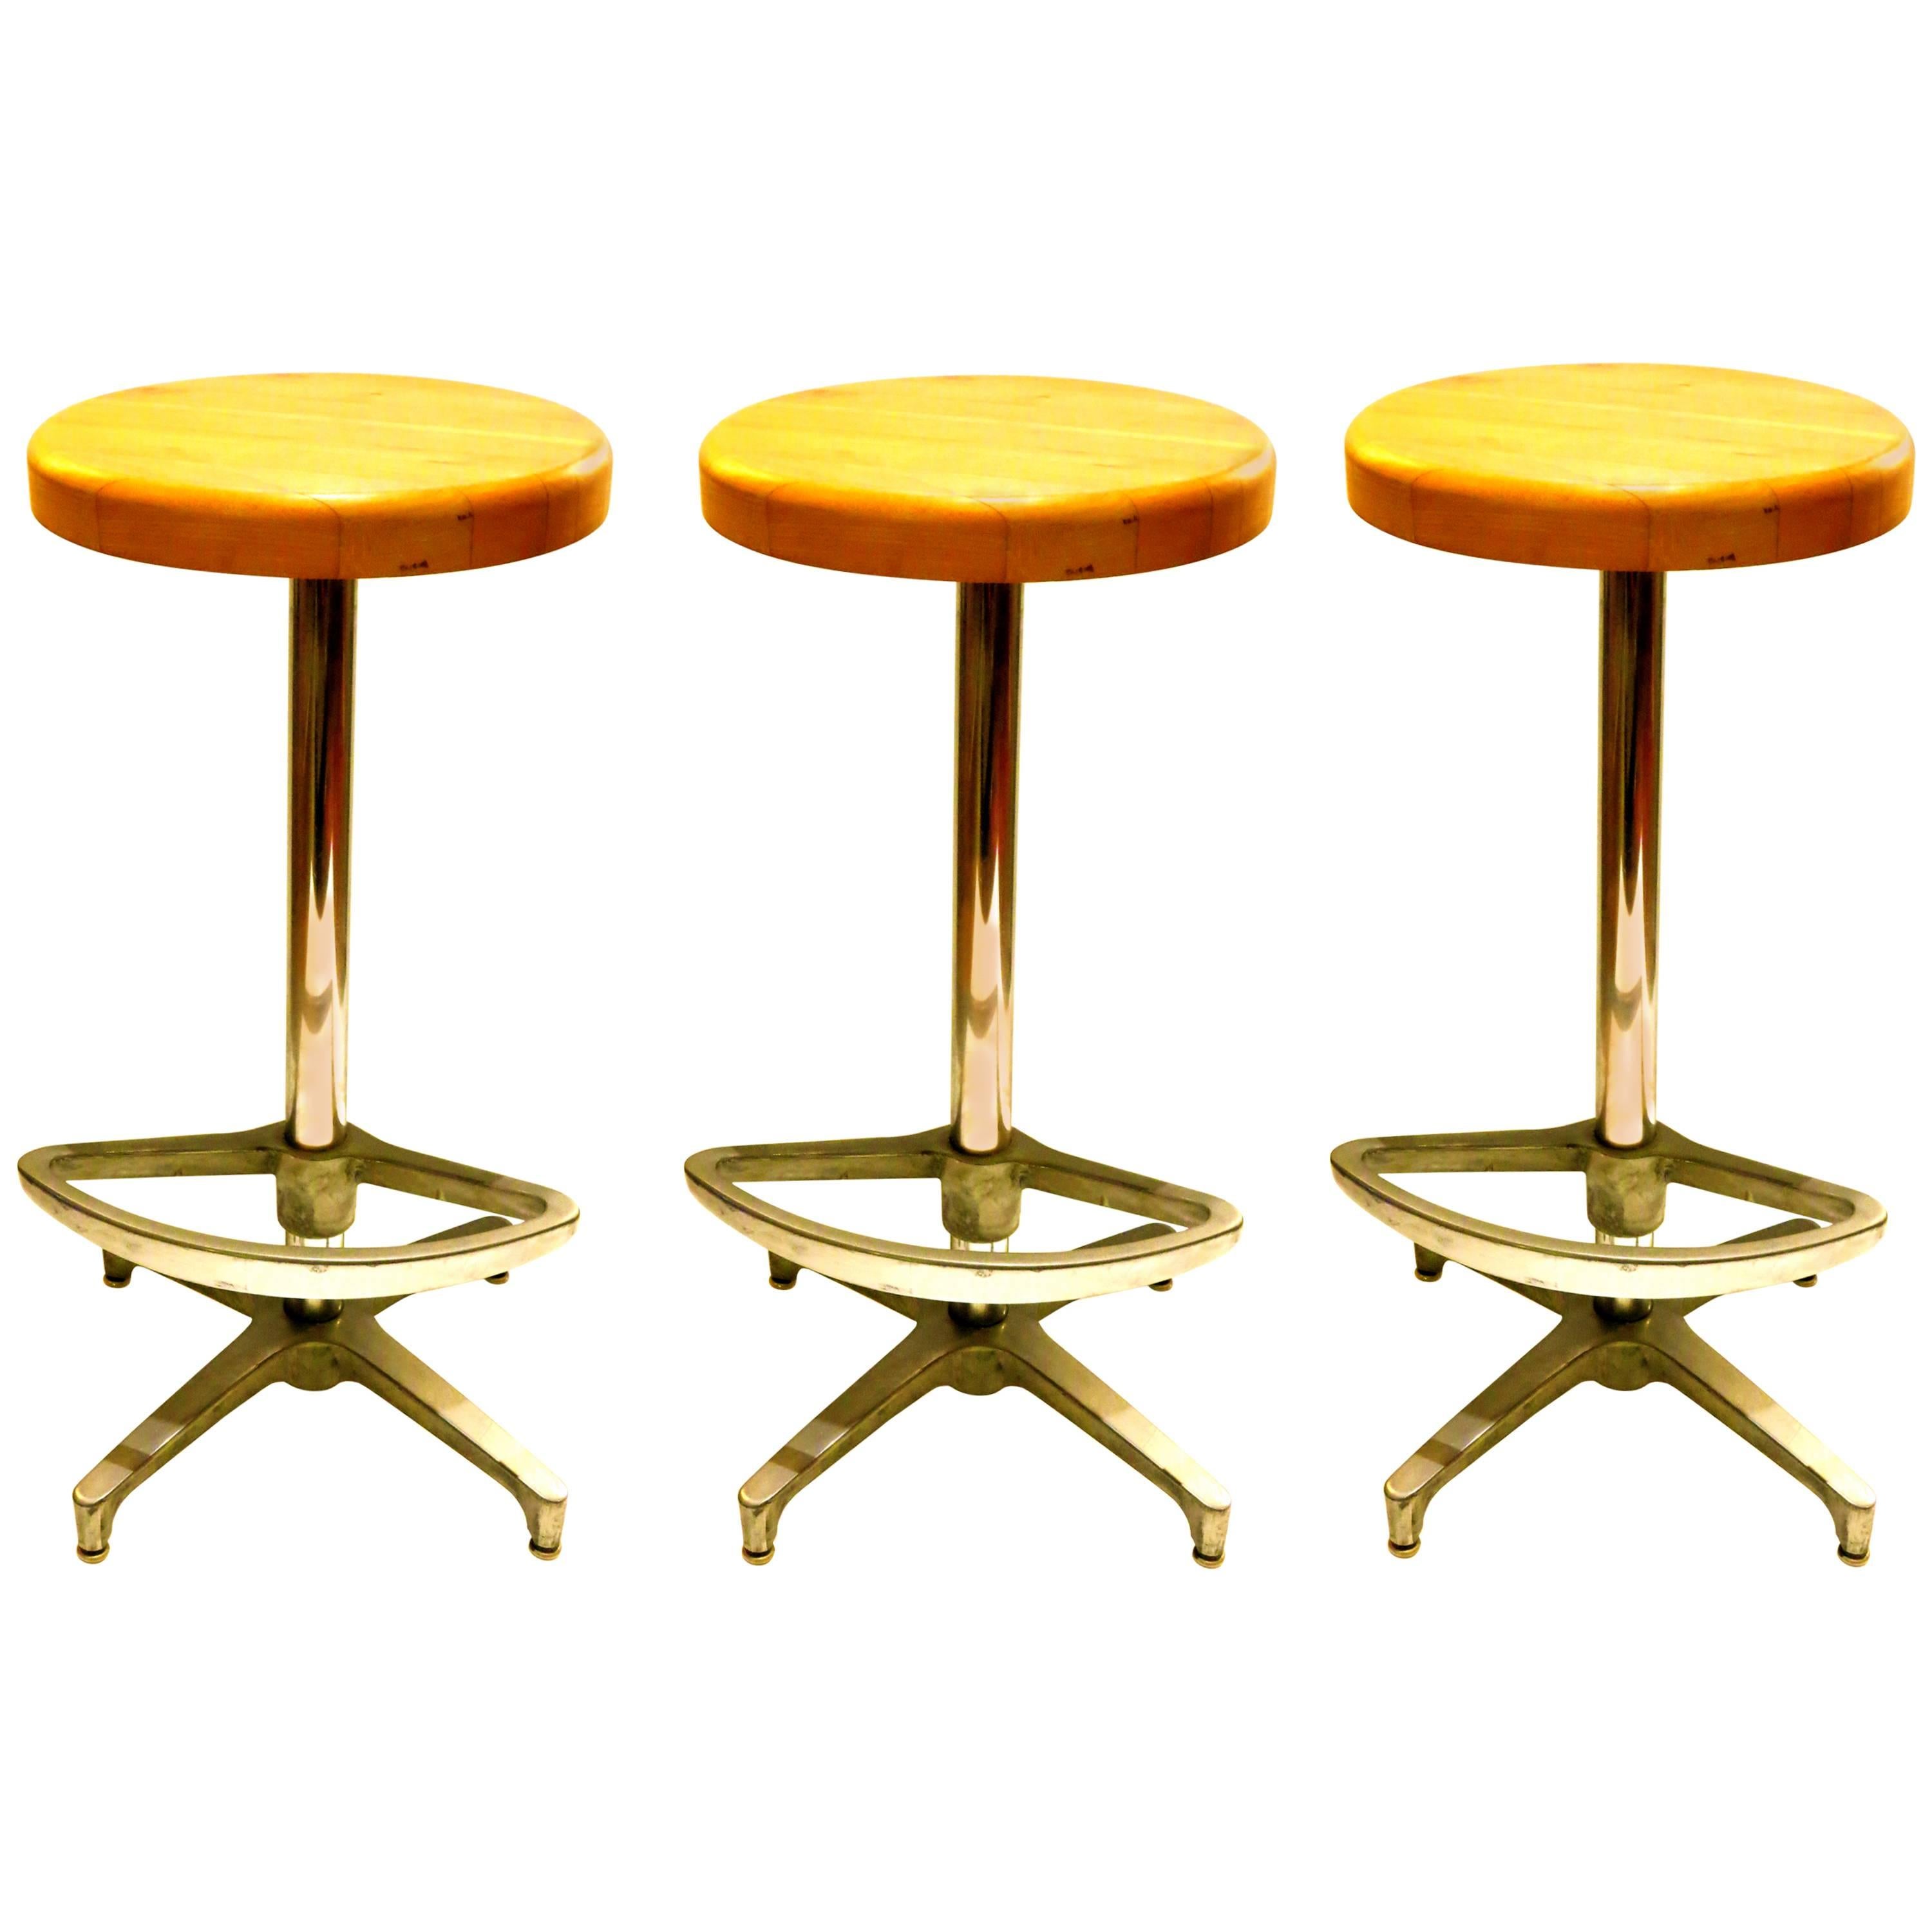 California Mid-Century Set of Three Industrial Style Barstools with Footrest